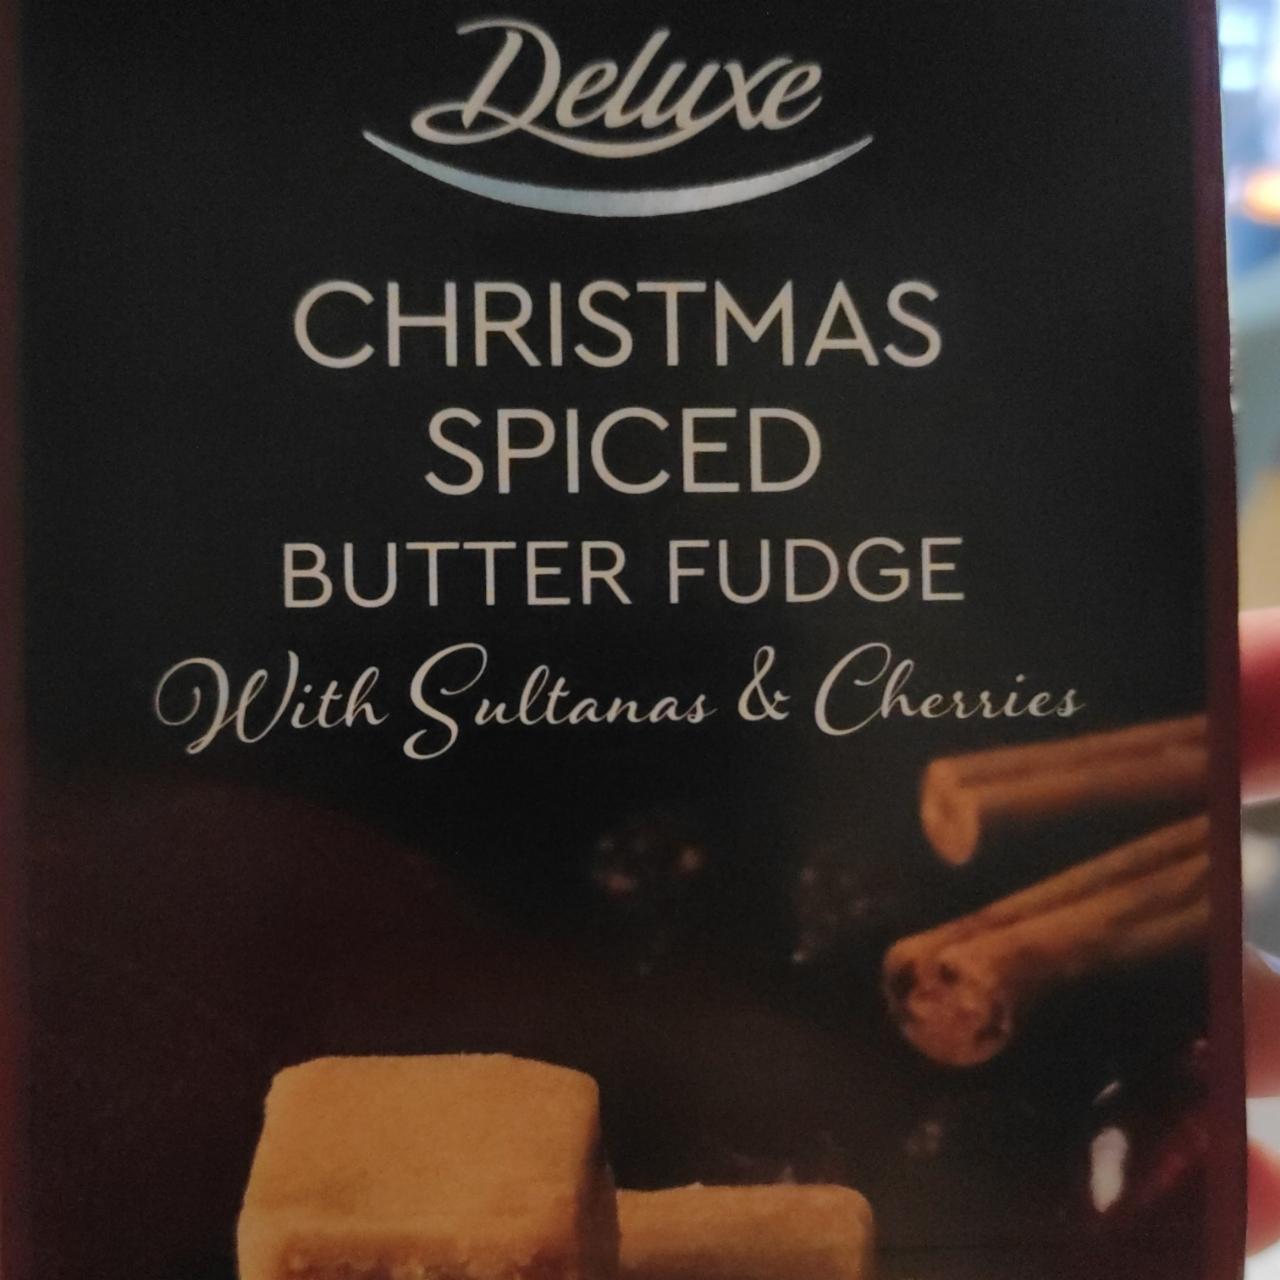 Fotografie - Christmas Spiced Butter Fudge with Sultanas & Cherries Deluxe